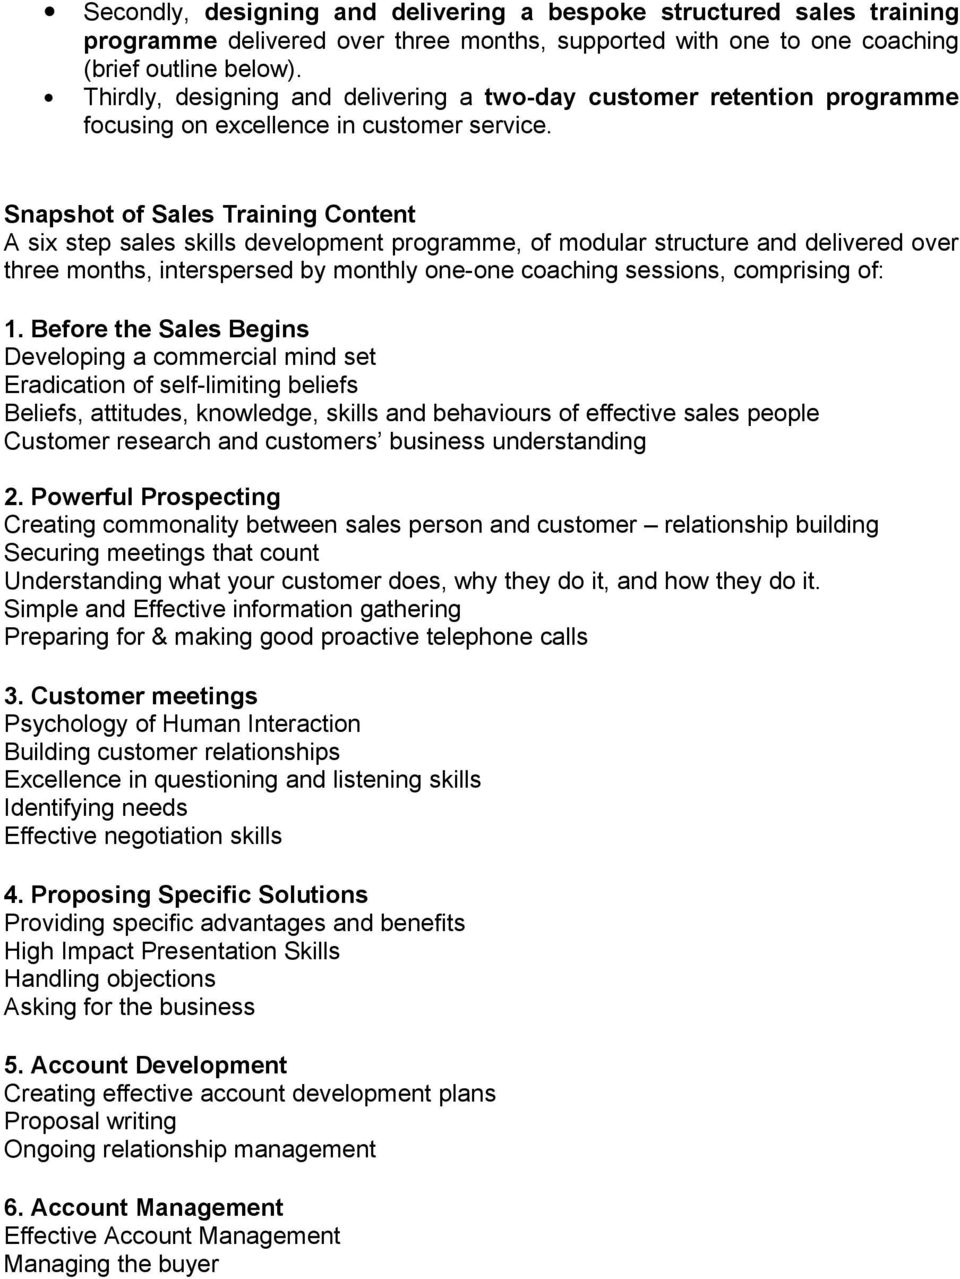 Snapshot of Sales Training Content A six step sales skills development programme, of modular structure and delivered over three months, interspersed by monthly one-one coaching sessions, comprising